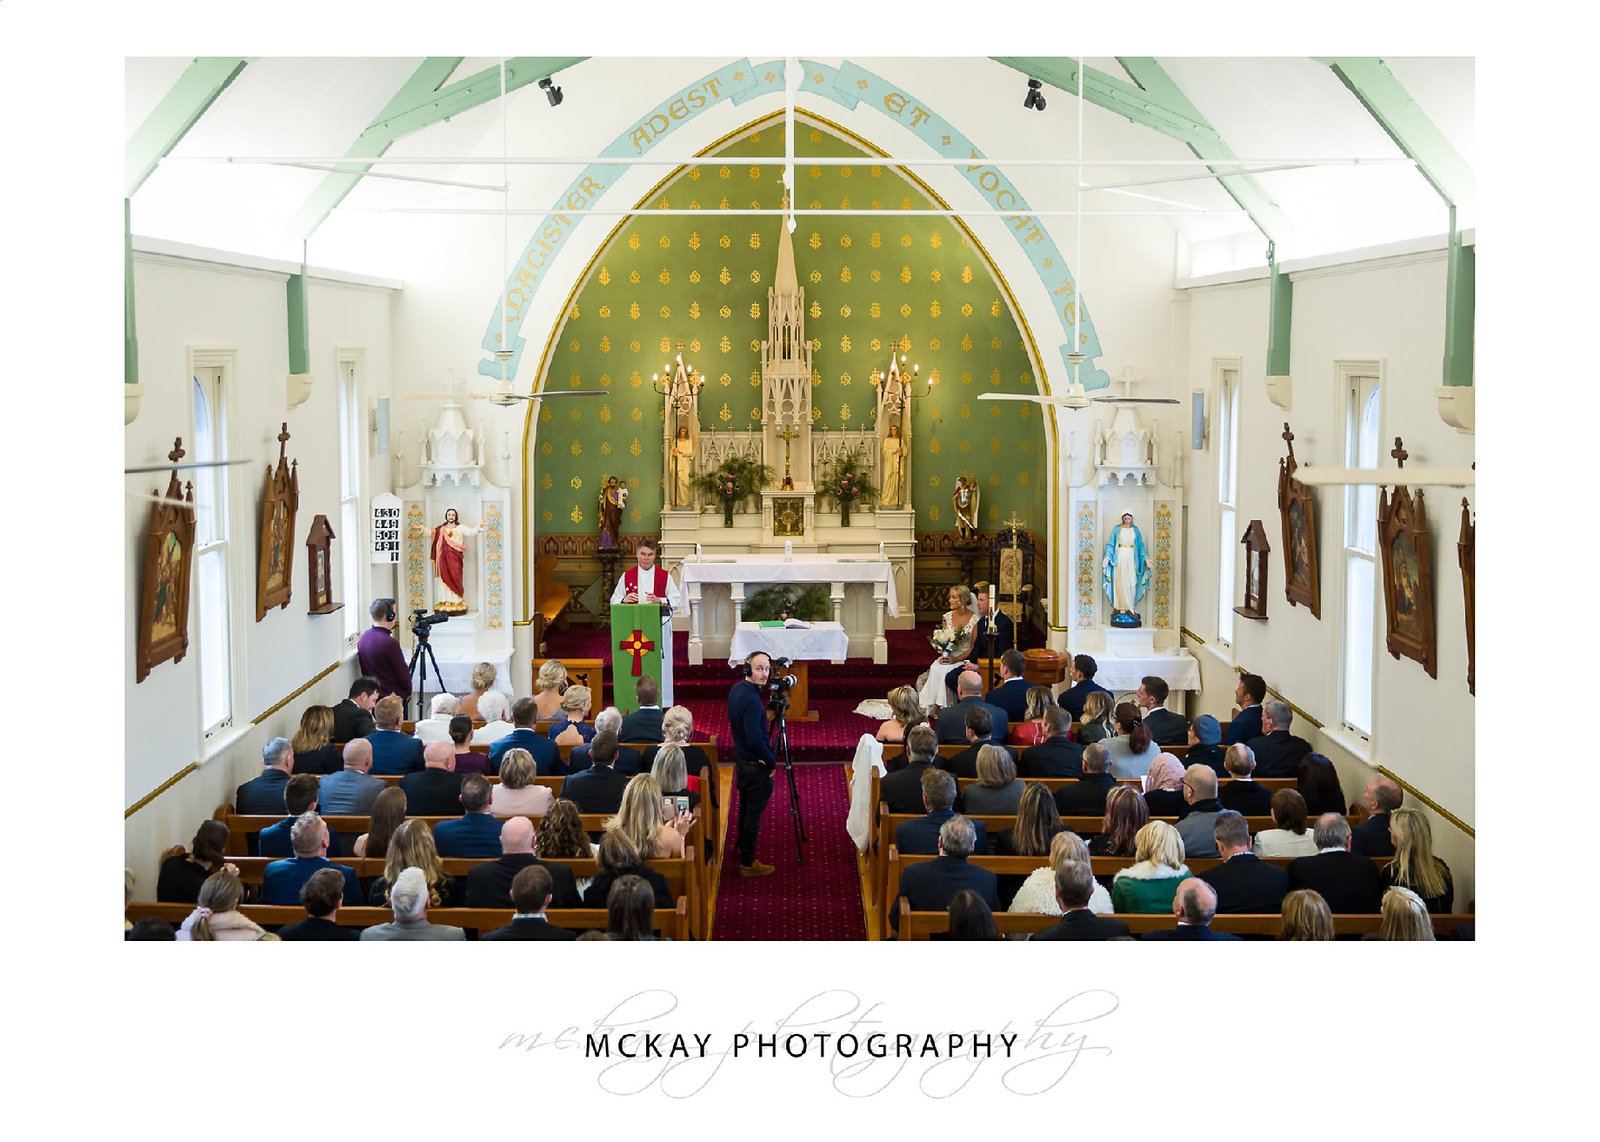 Interior view of St Michael's Church in Mittagong